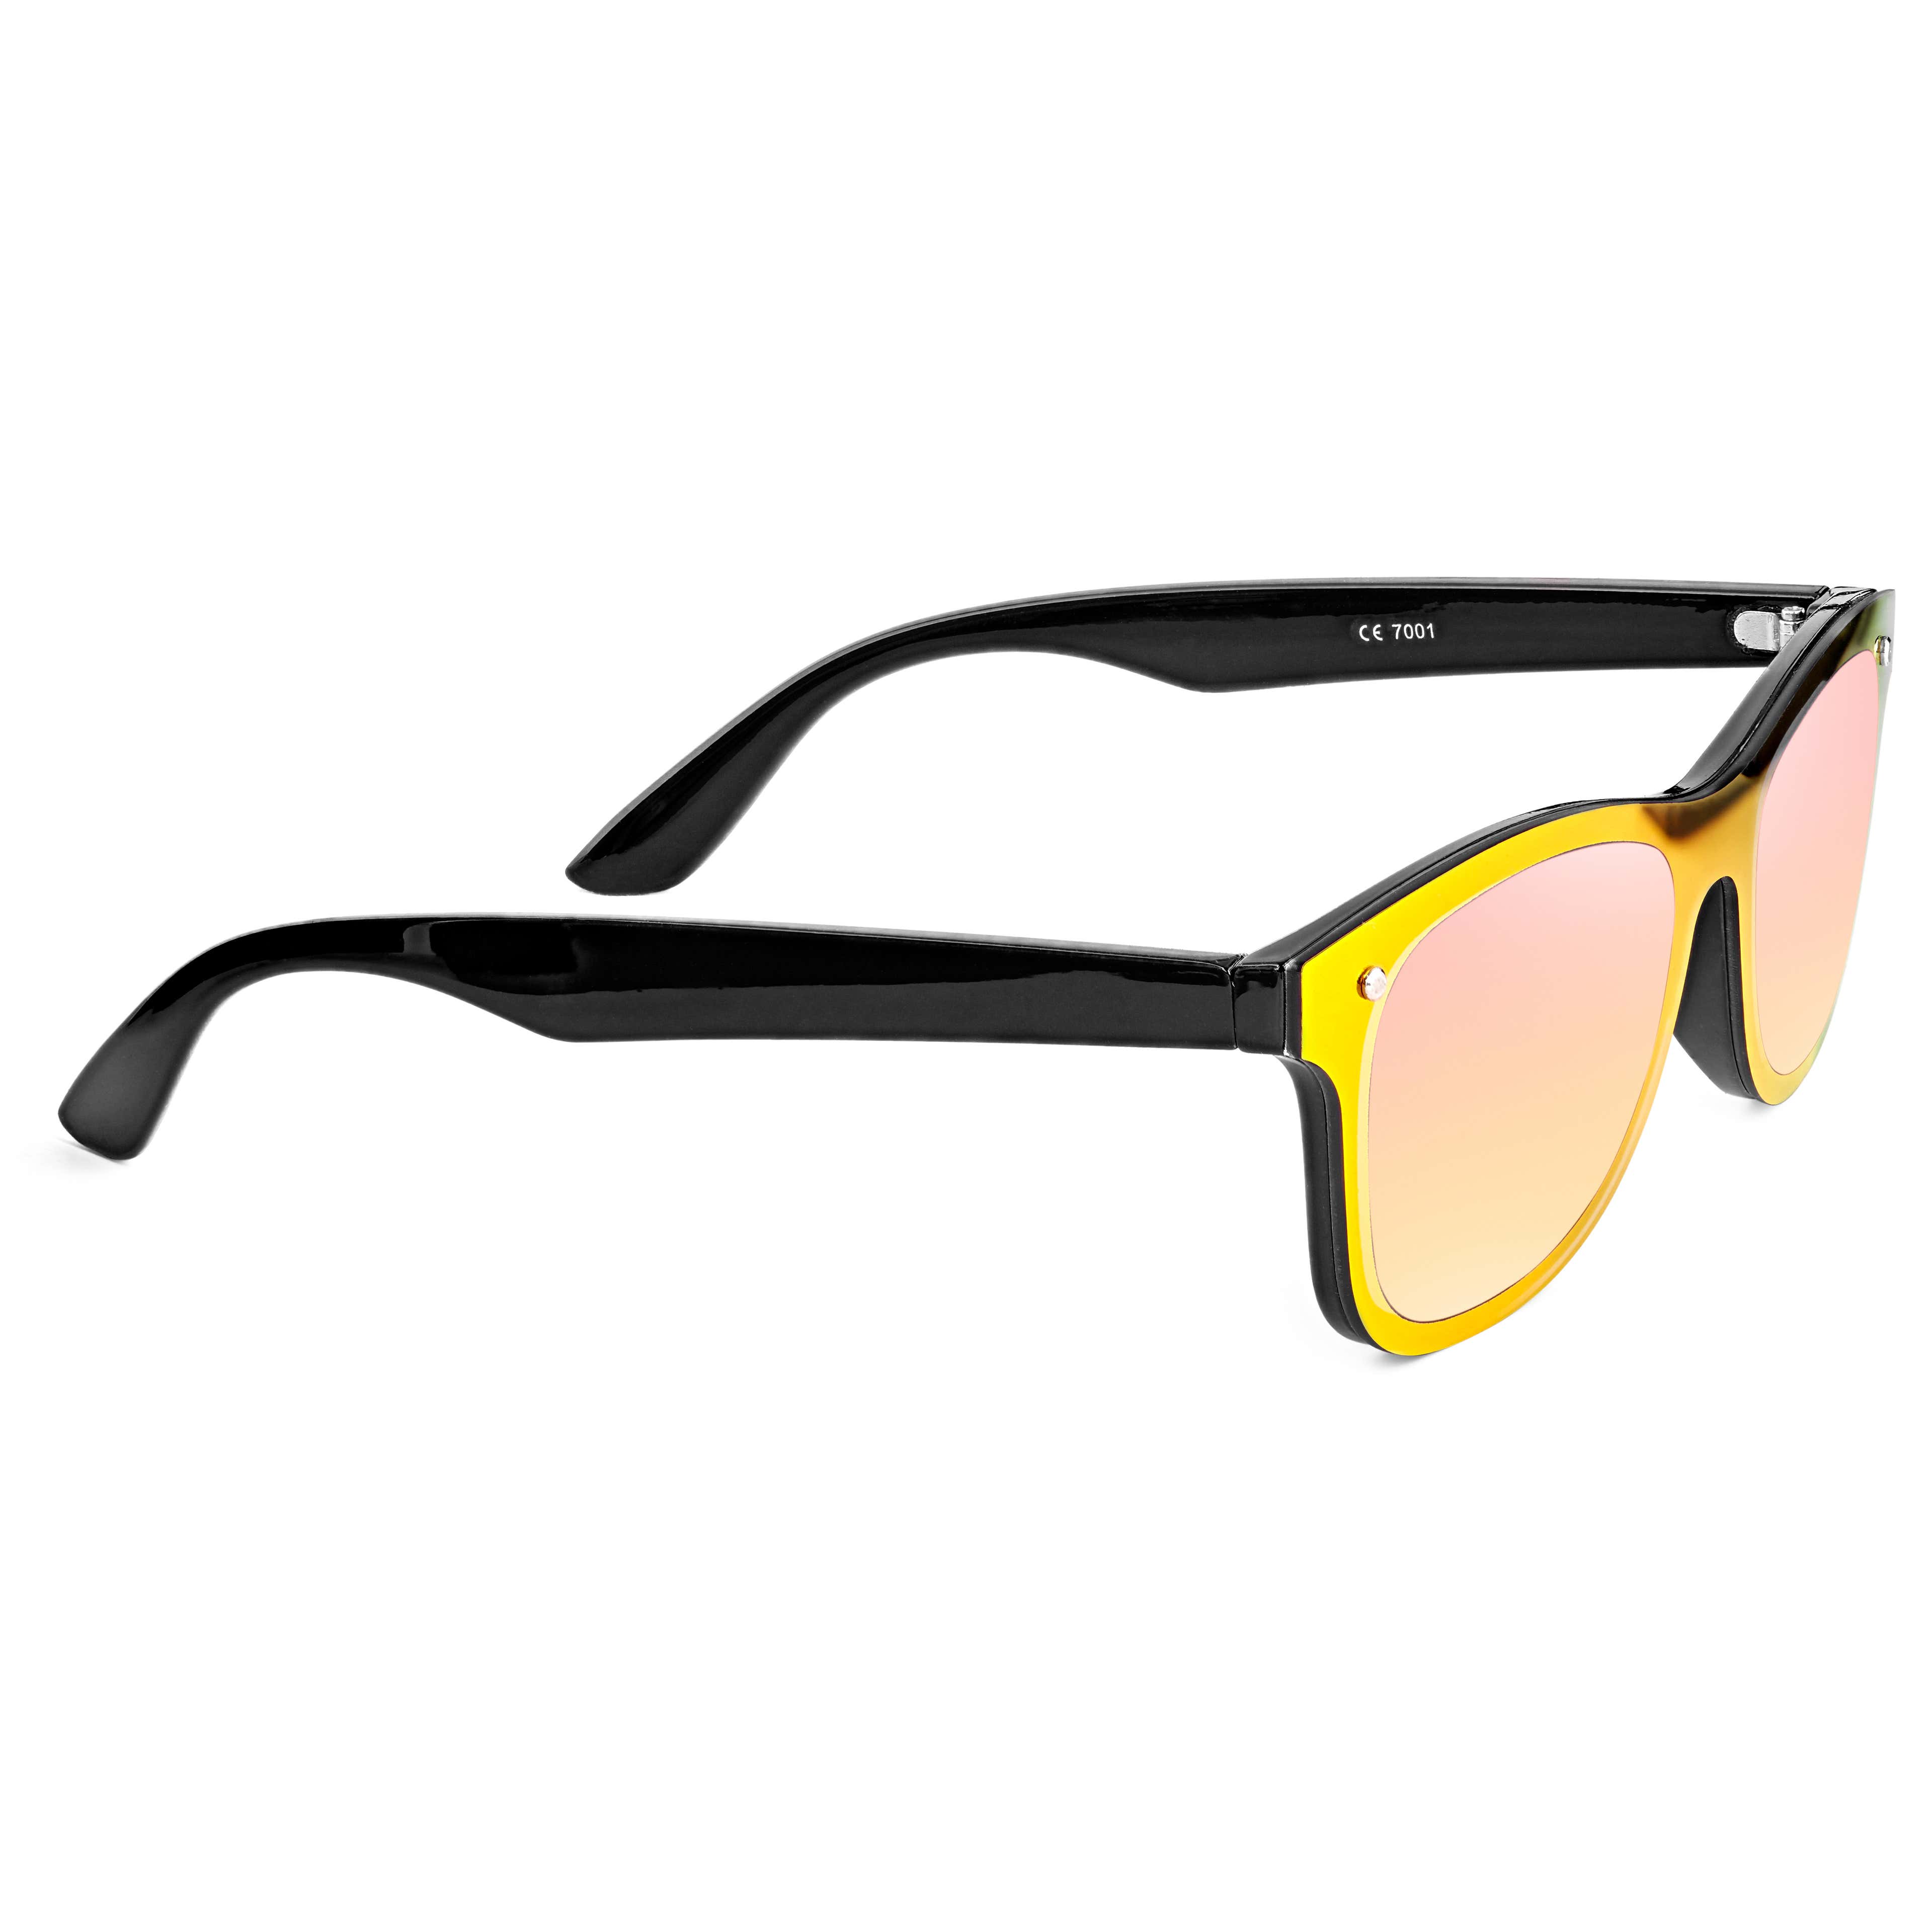 Yellow and Black Frame Sunglasses - 3 - gallery